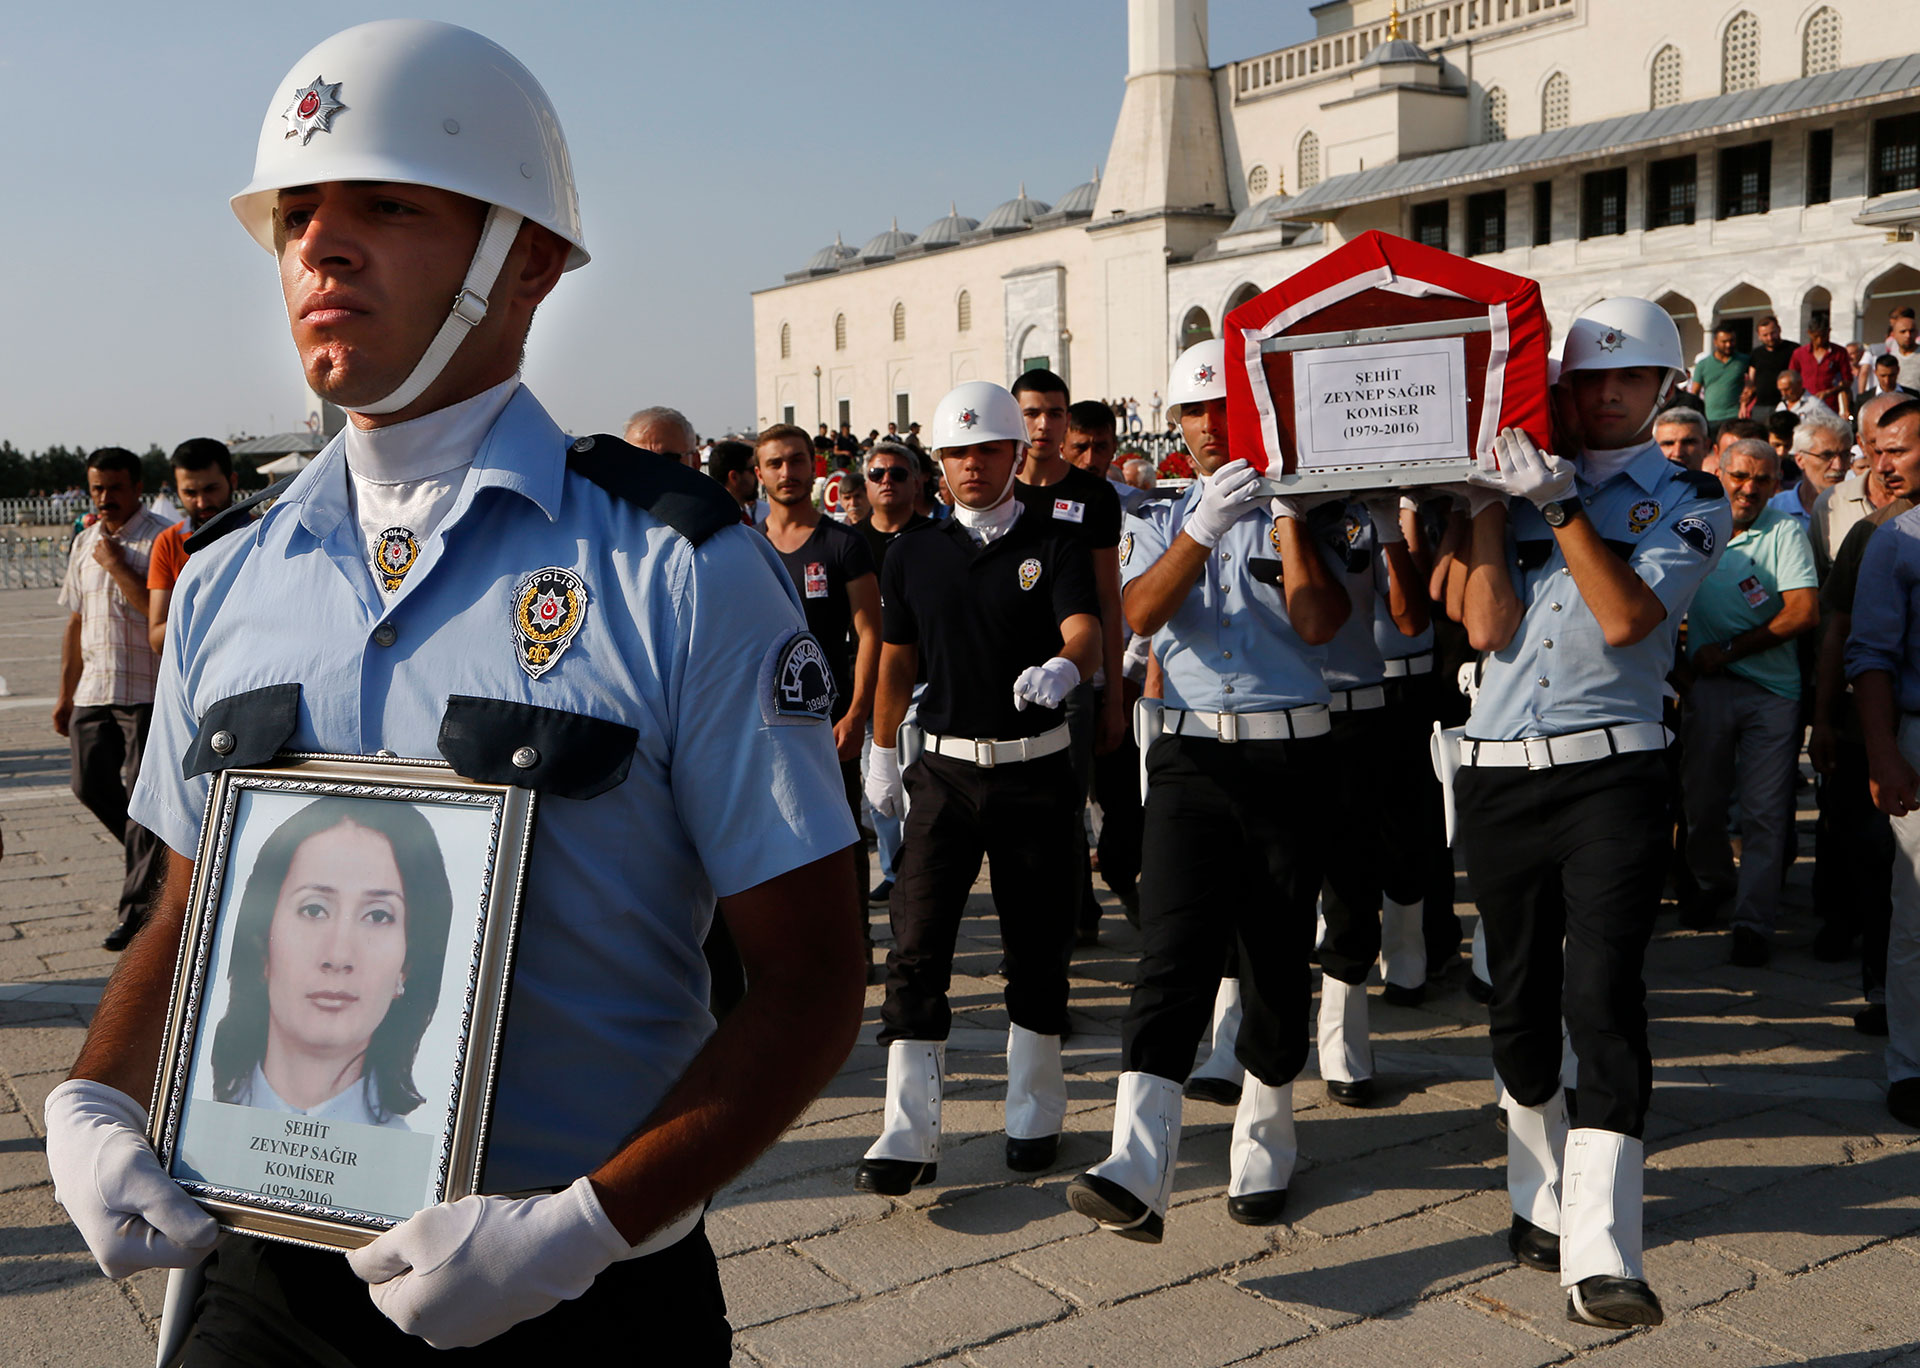 A Turkish honor guard carry the coffin of a policewoman killed Friday during the failed military coup, during a mass funeral in Ankara, Turkey, Monday, July 18, 2016. (AP Photo/Hussein Malla)